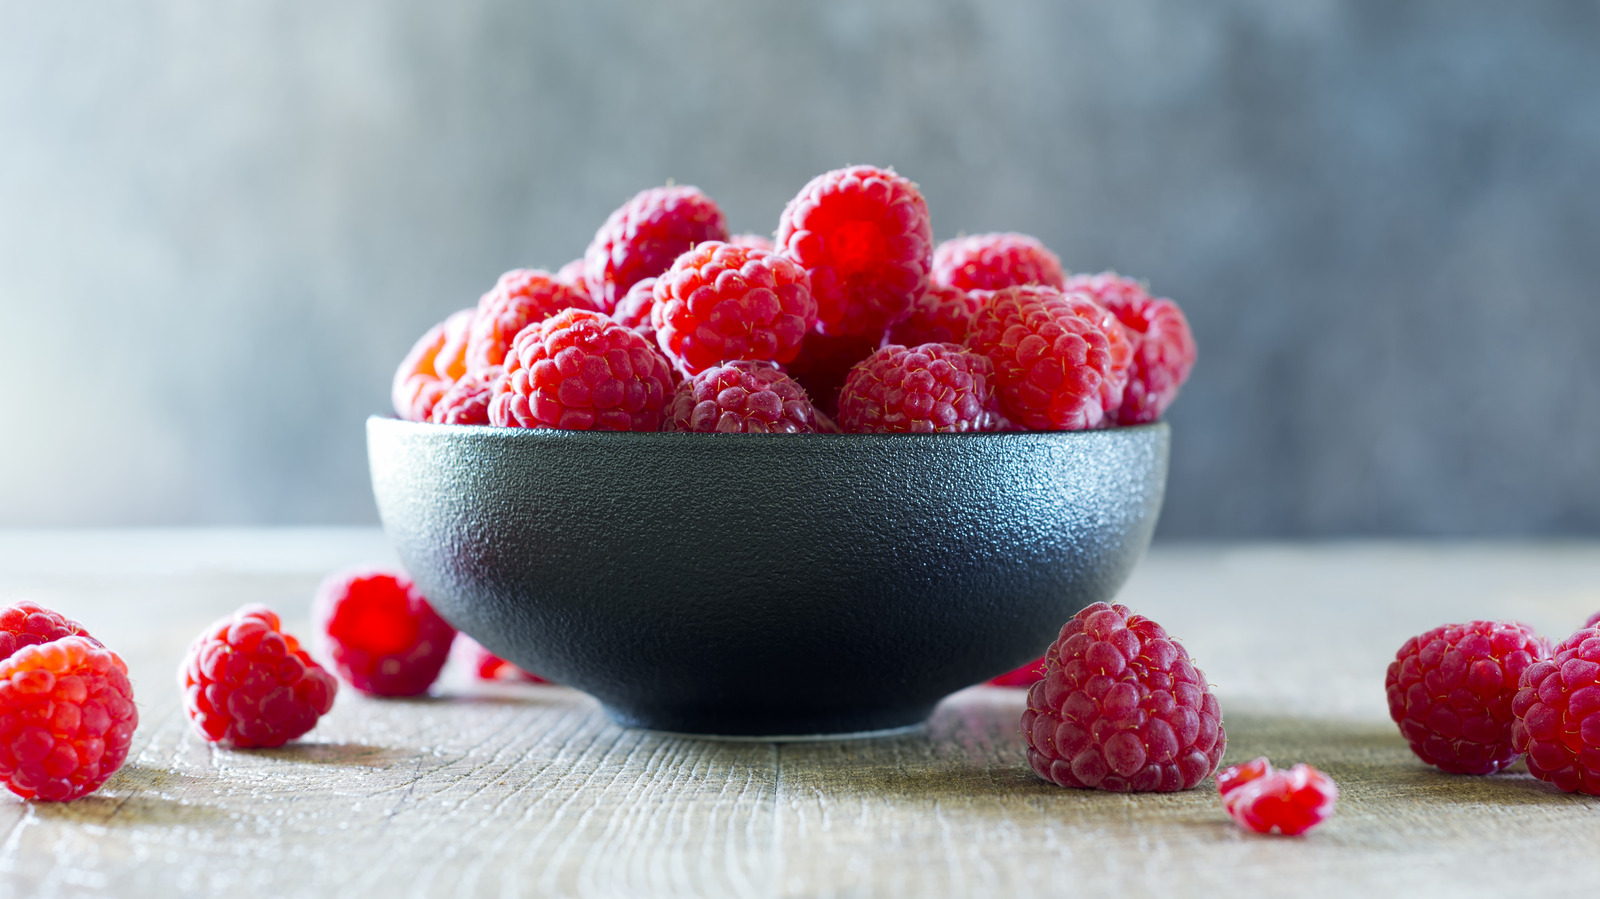 https://www.foodrepublic.com/img/gallery/the-vinegar-solution-for-perfectly-clean-raspberries/l-intro-1696259359.jpg